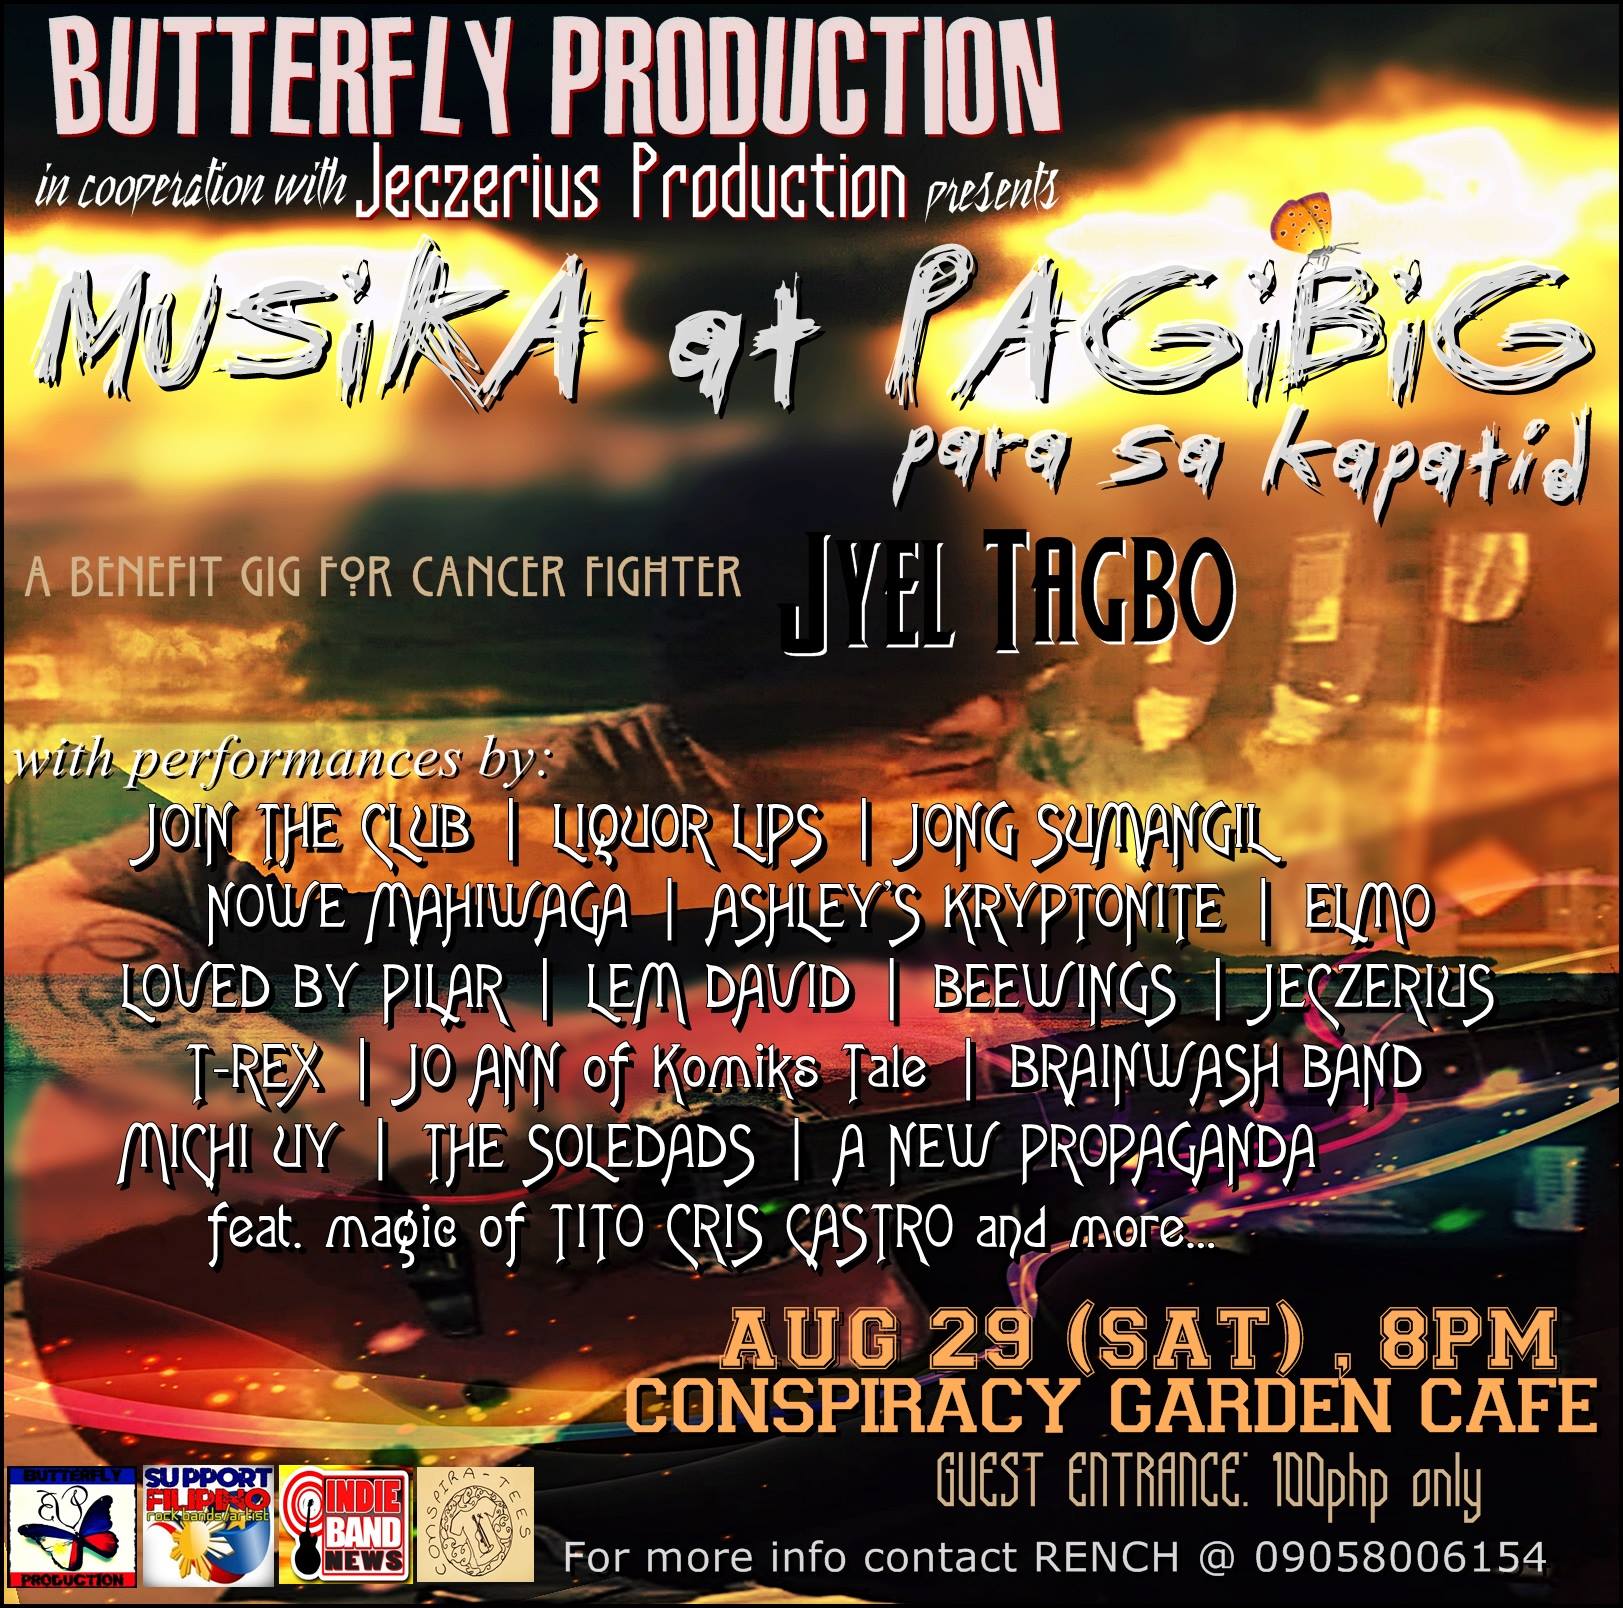 Butterfly Production BUTTERFLY PRODUCTION in cooperation with Jeczerius Production presents: "MUSIKA at PAG-IBIG para sa KAPATID" ---- A benefit gig for cancer fighter JyEL Tagbo. with performances by: JOIN THE CLUB LIQUOR LIPS JONG SUMANGIL NOWE MAHIWAGA ASHLEY'S KRYPTONITE ELMO LOVED BY PILAR T-REX JO ANN of Komiks Tale BRAINWASH BAND MICHI UY THE SOLEDADS A NEW PROPAGANDA JECZERIUS LEM DAVID BEEWINGS feat. TITO CRIS CASTRO of Pilipinas Got Talent. AUG 29 (SAT) , 8pm Conspiracy Bar and Garden Cafe Entrance : 100php only. *Proceeds will be given to our warrior. (JYEL) And also, we will be having a box at the gate entrance for all people who want to give separate donations for Jyel Tagbo's medication expenses and painkillers. Kindly Share and Support. God Bless..